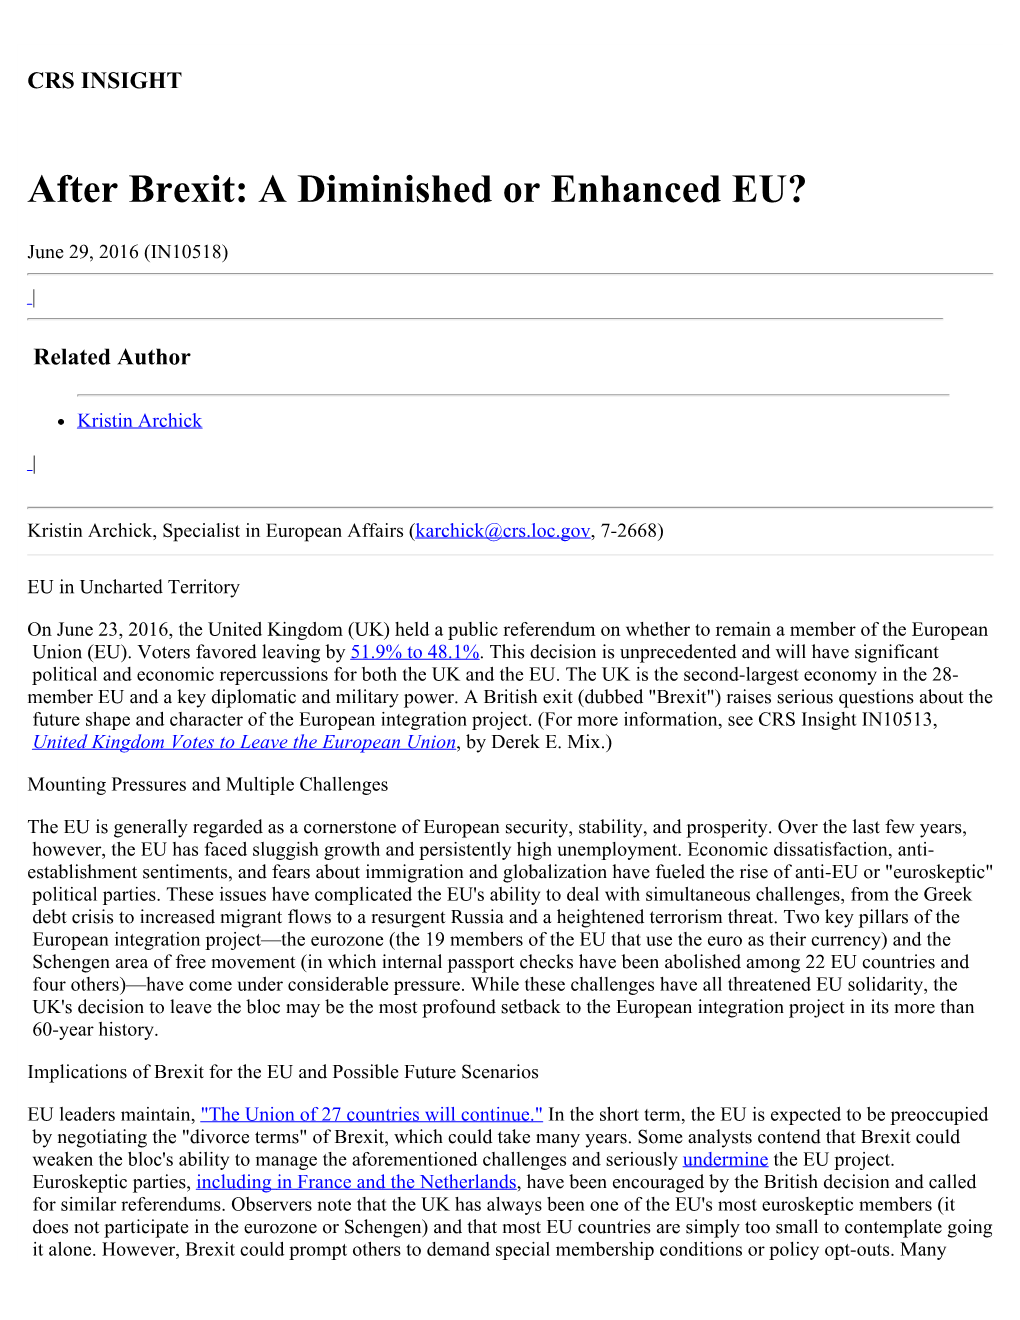 After Brexit: a Diminished Or Enhanced EU?